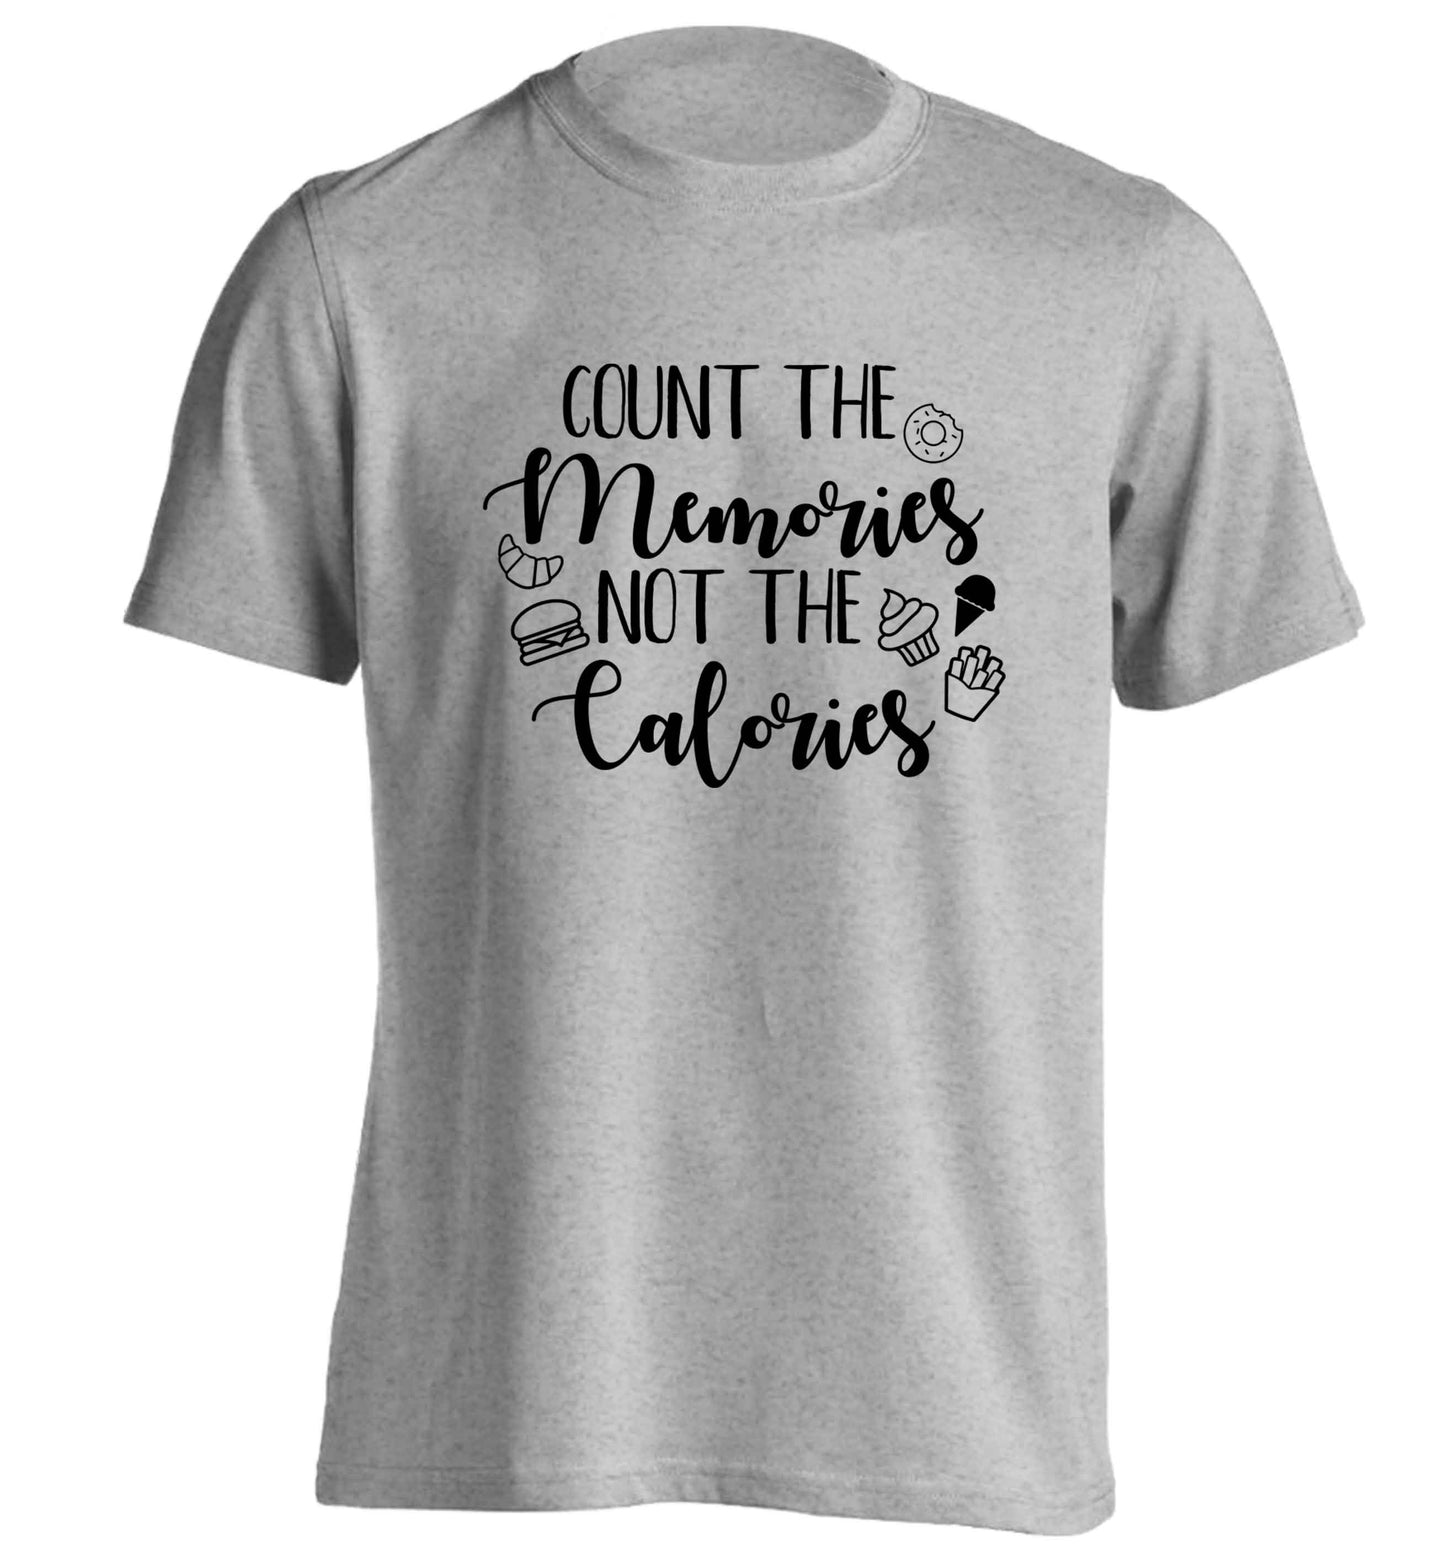 Count the memories not the calories adults unisex grey Tshirt 2XL